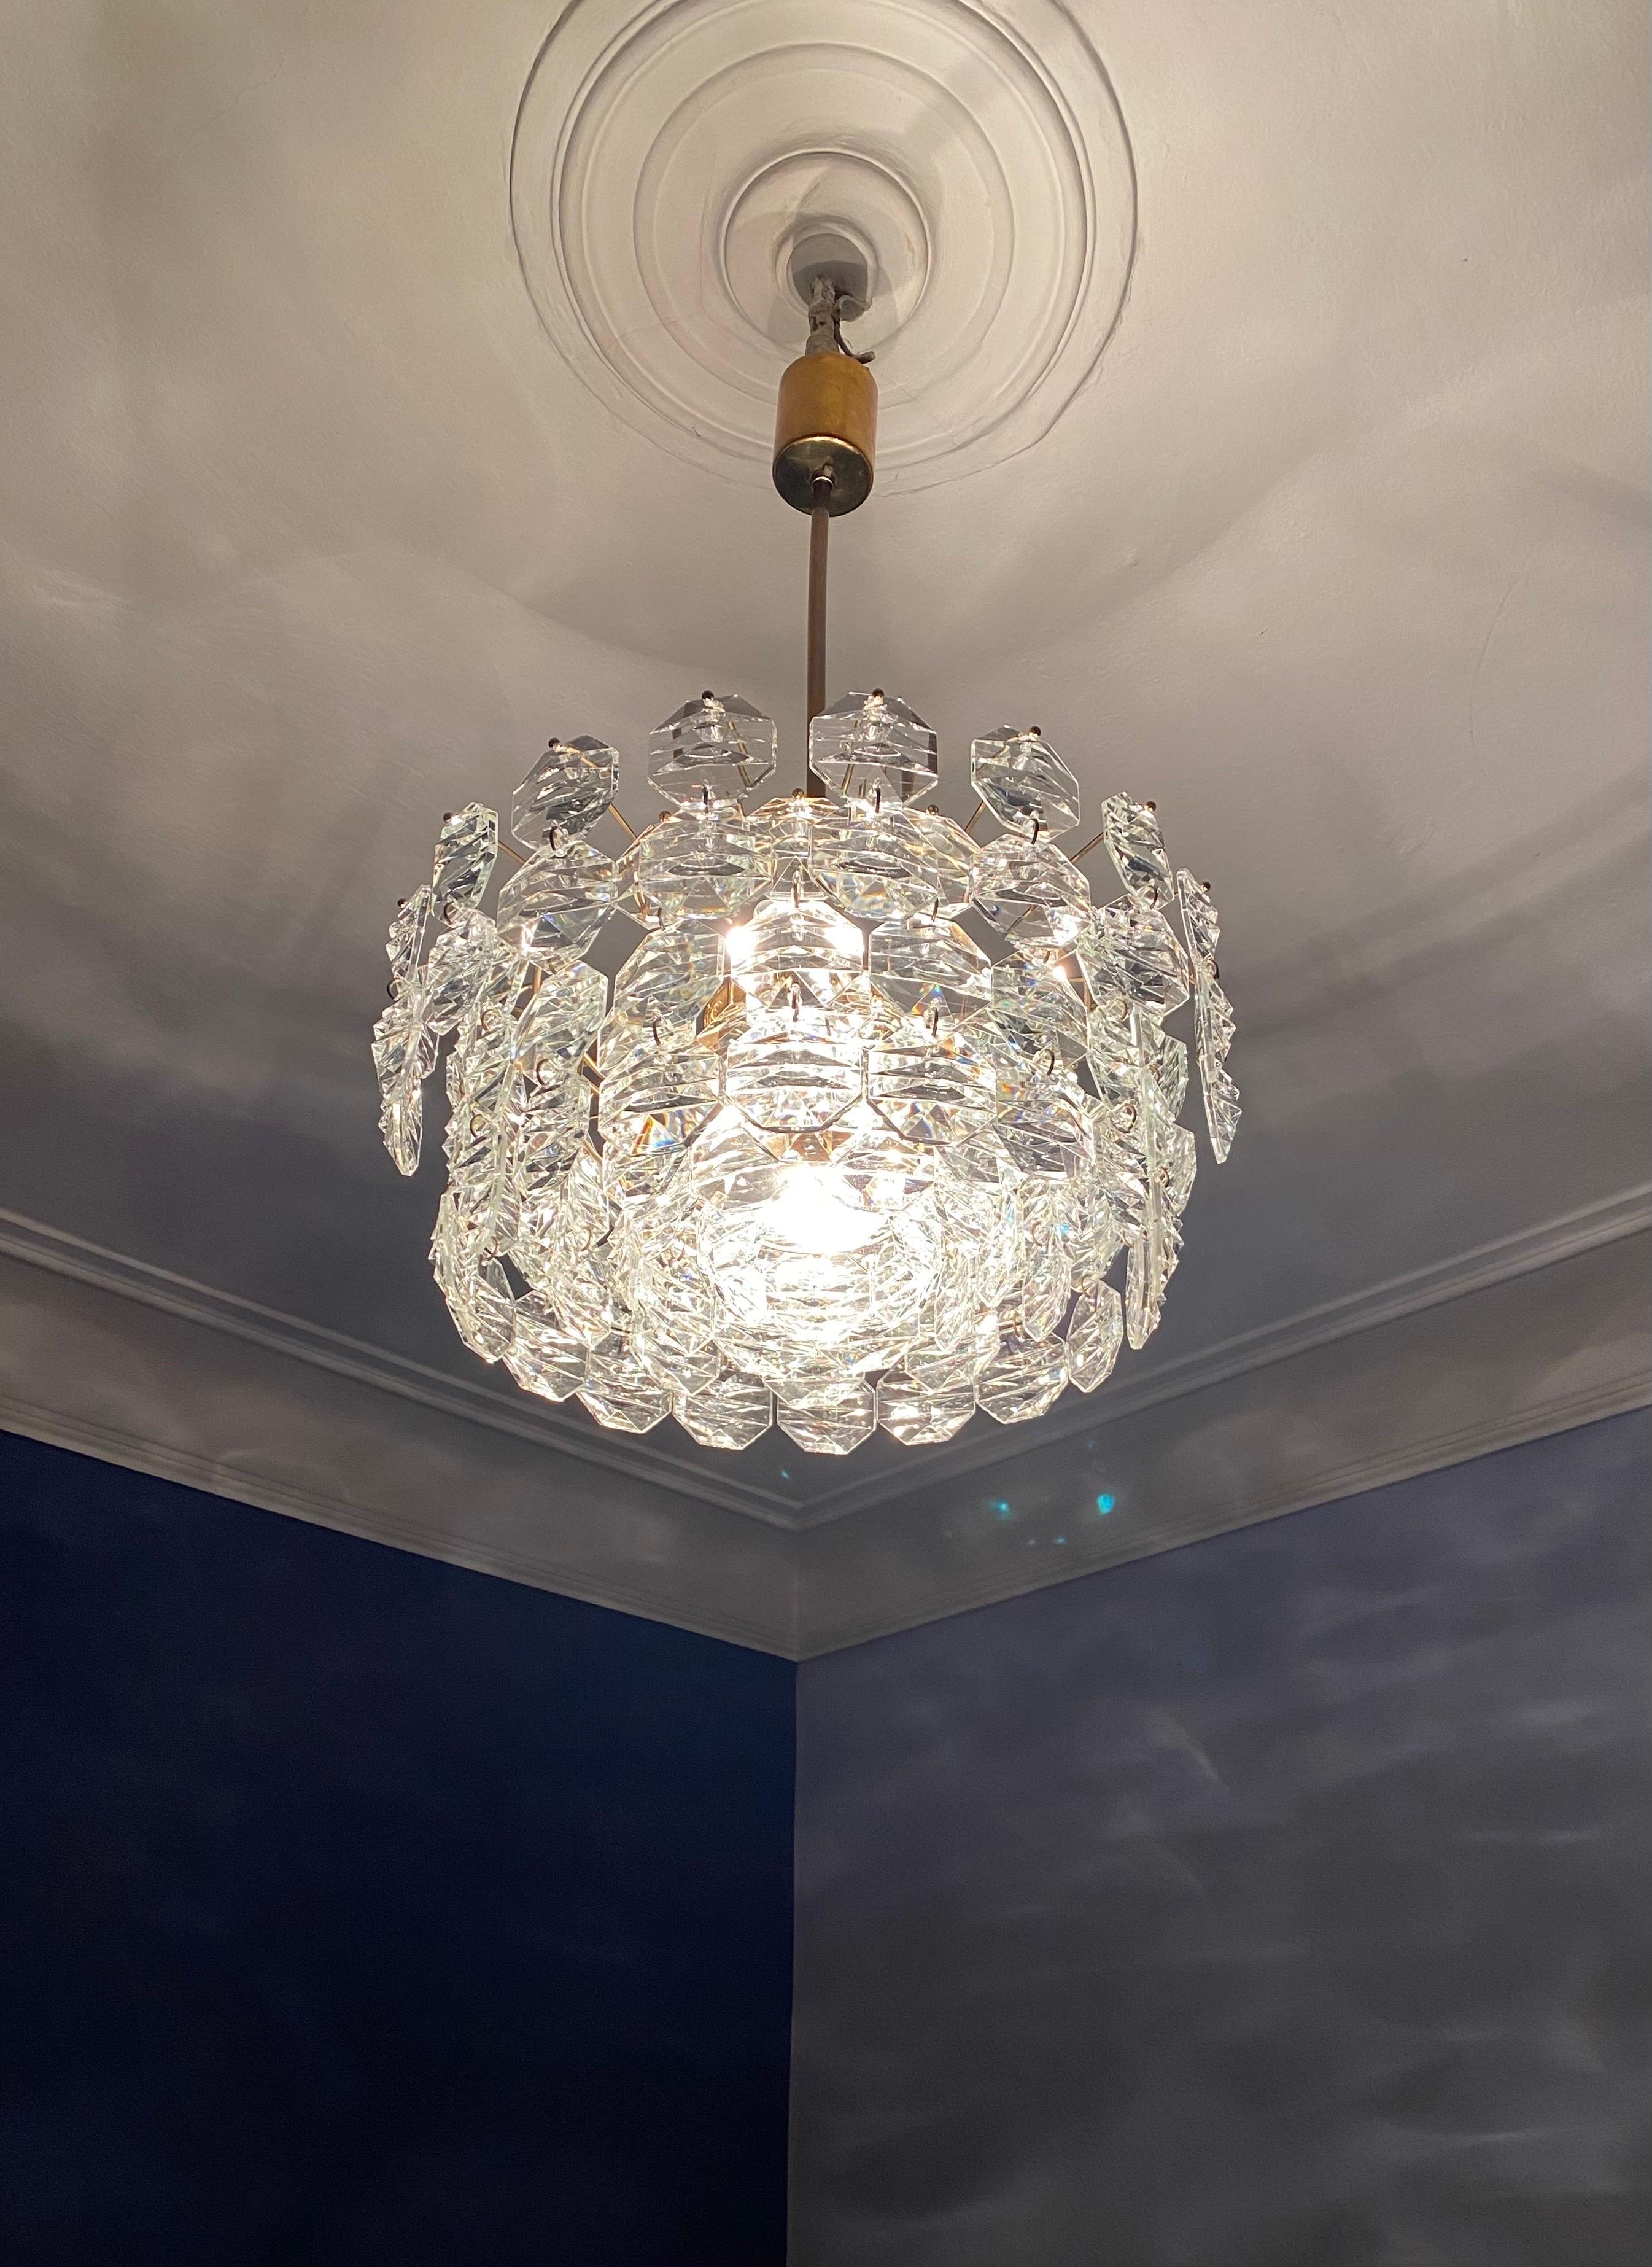 A Mid-Century Modern Chrystal chandelier from the late 60s made by Kinkeldey, Germany.
A really rare Version from Kinkeldey with elegant and in a modern style shaped lead-chrystal elements.